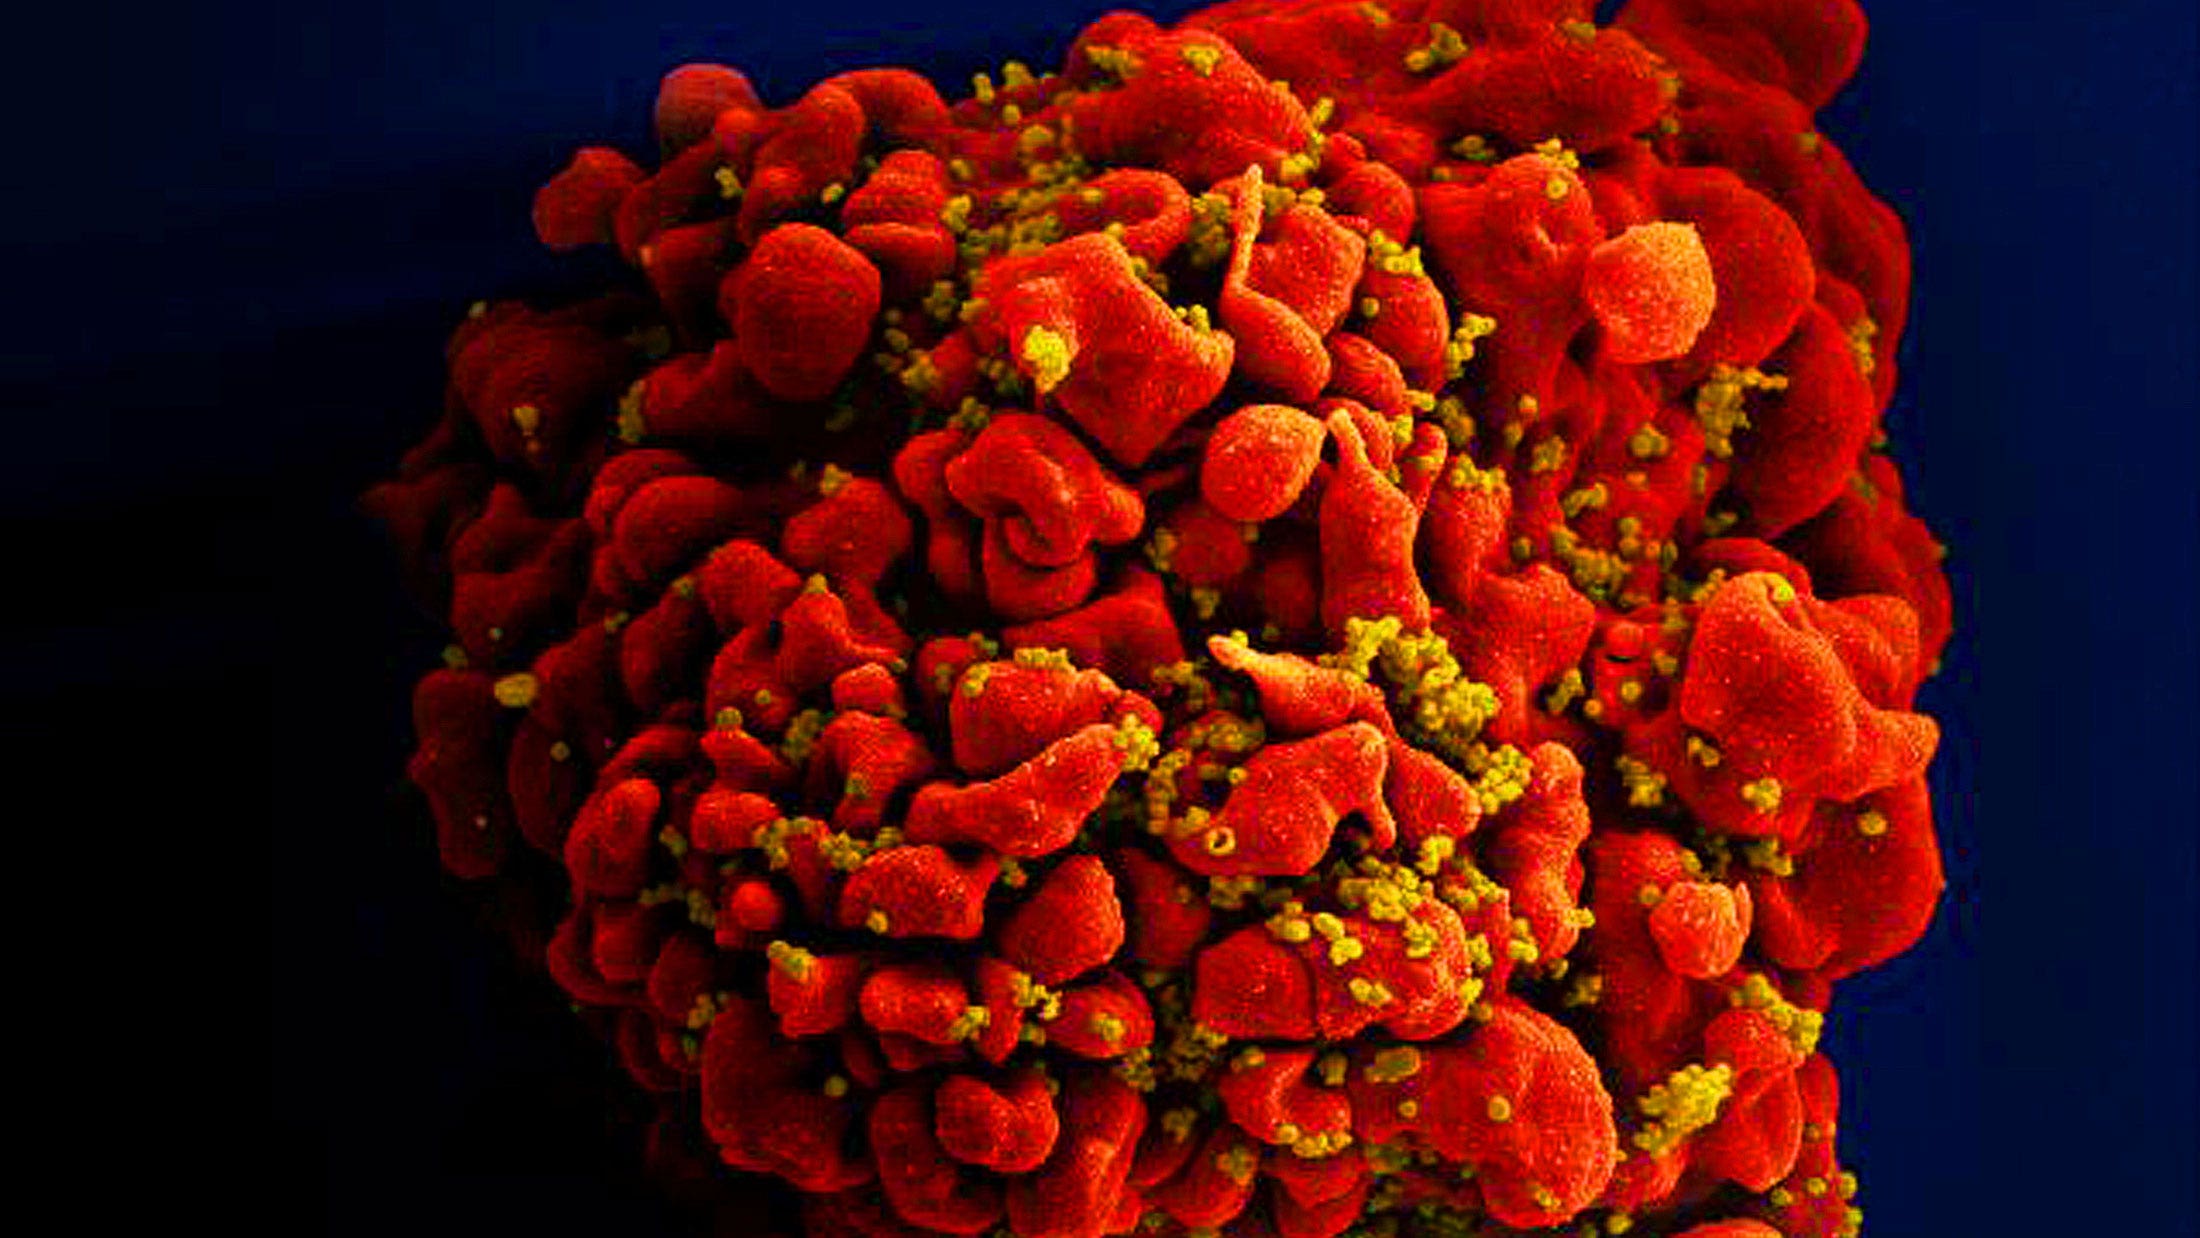 66-year-old HIV patient becomes the oldest person to be cured after stem cell transplant